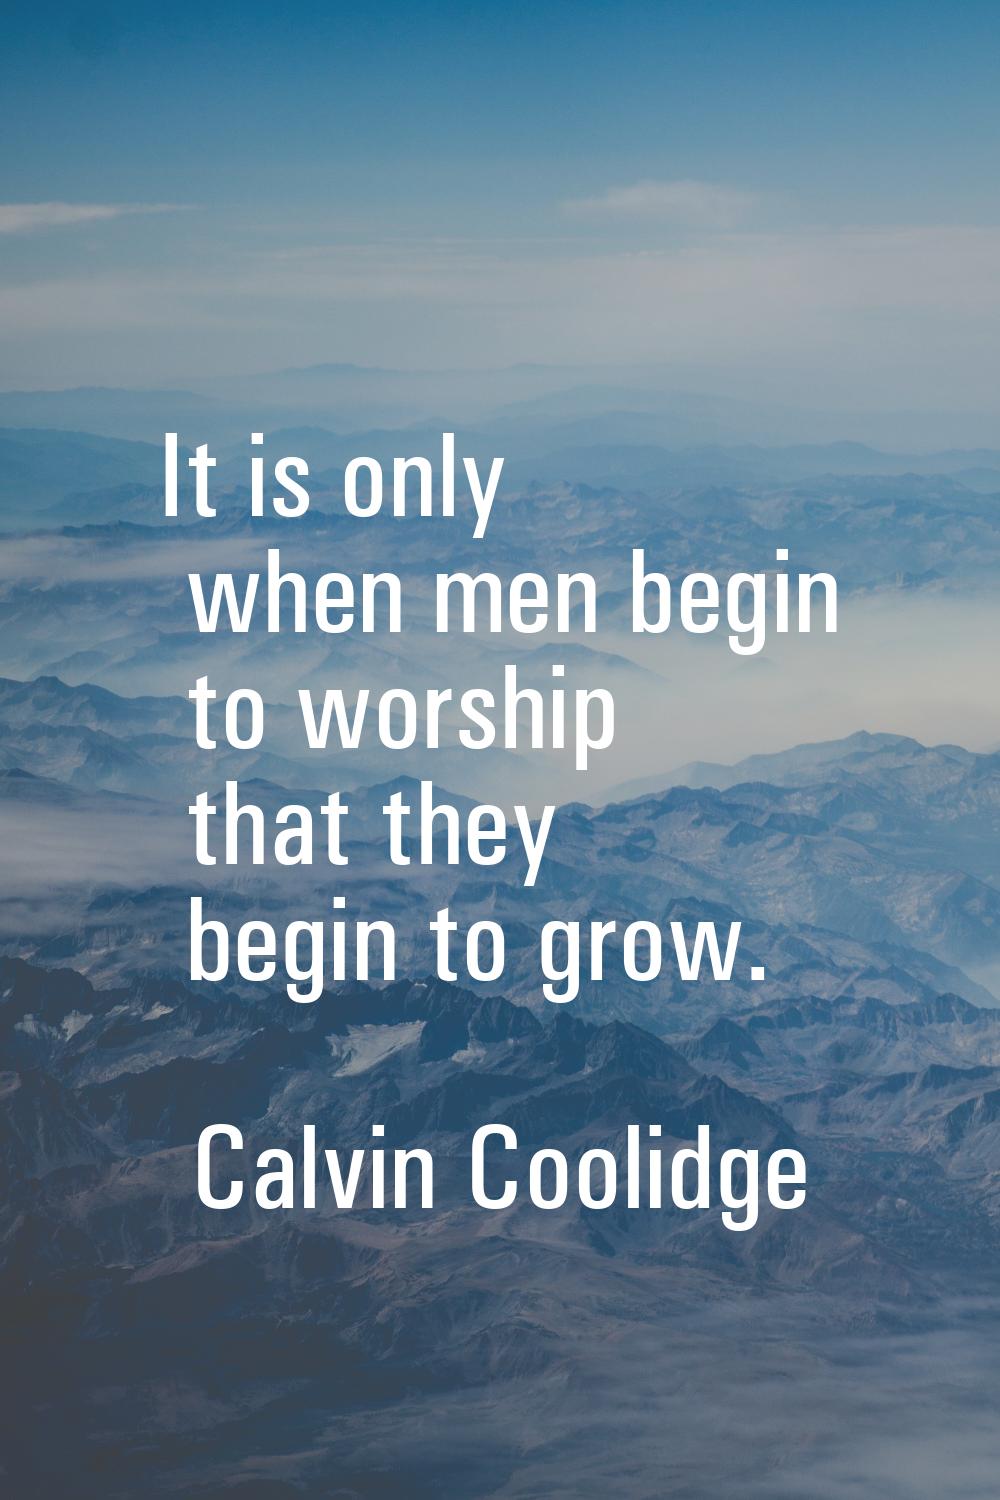 It is only when men begin to worship that they begin to grow.